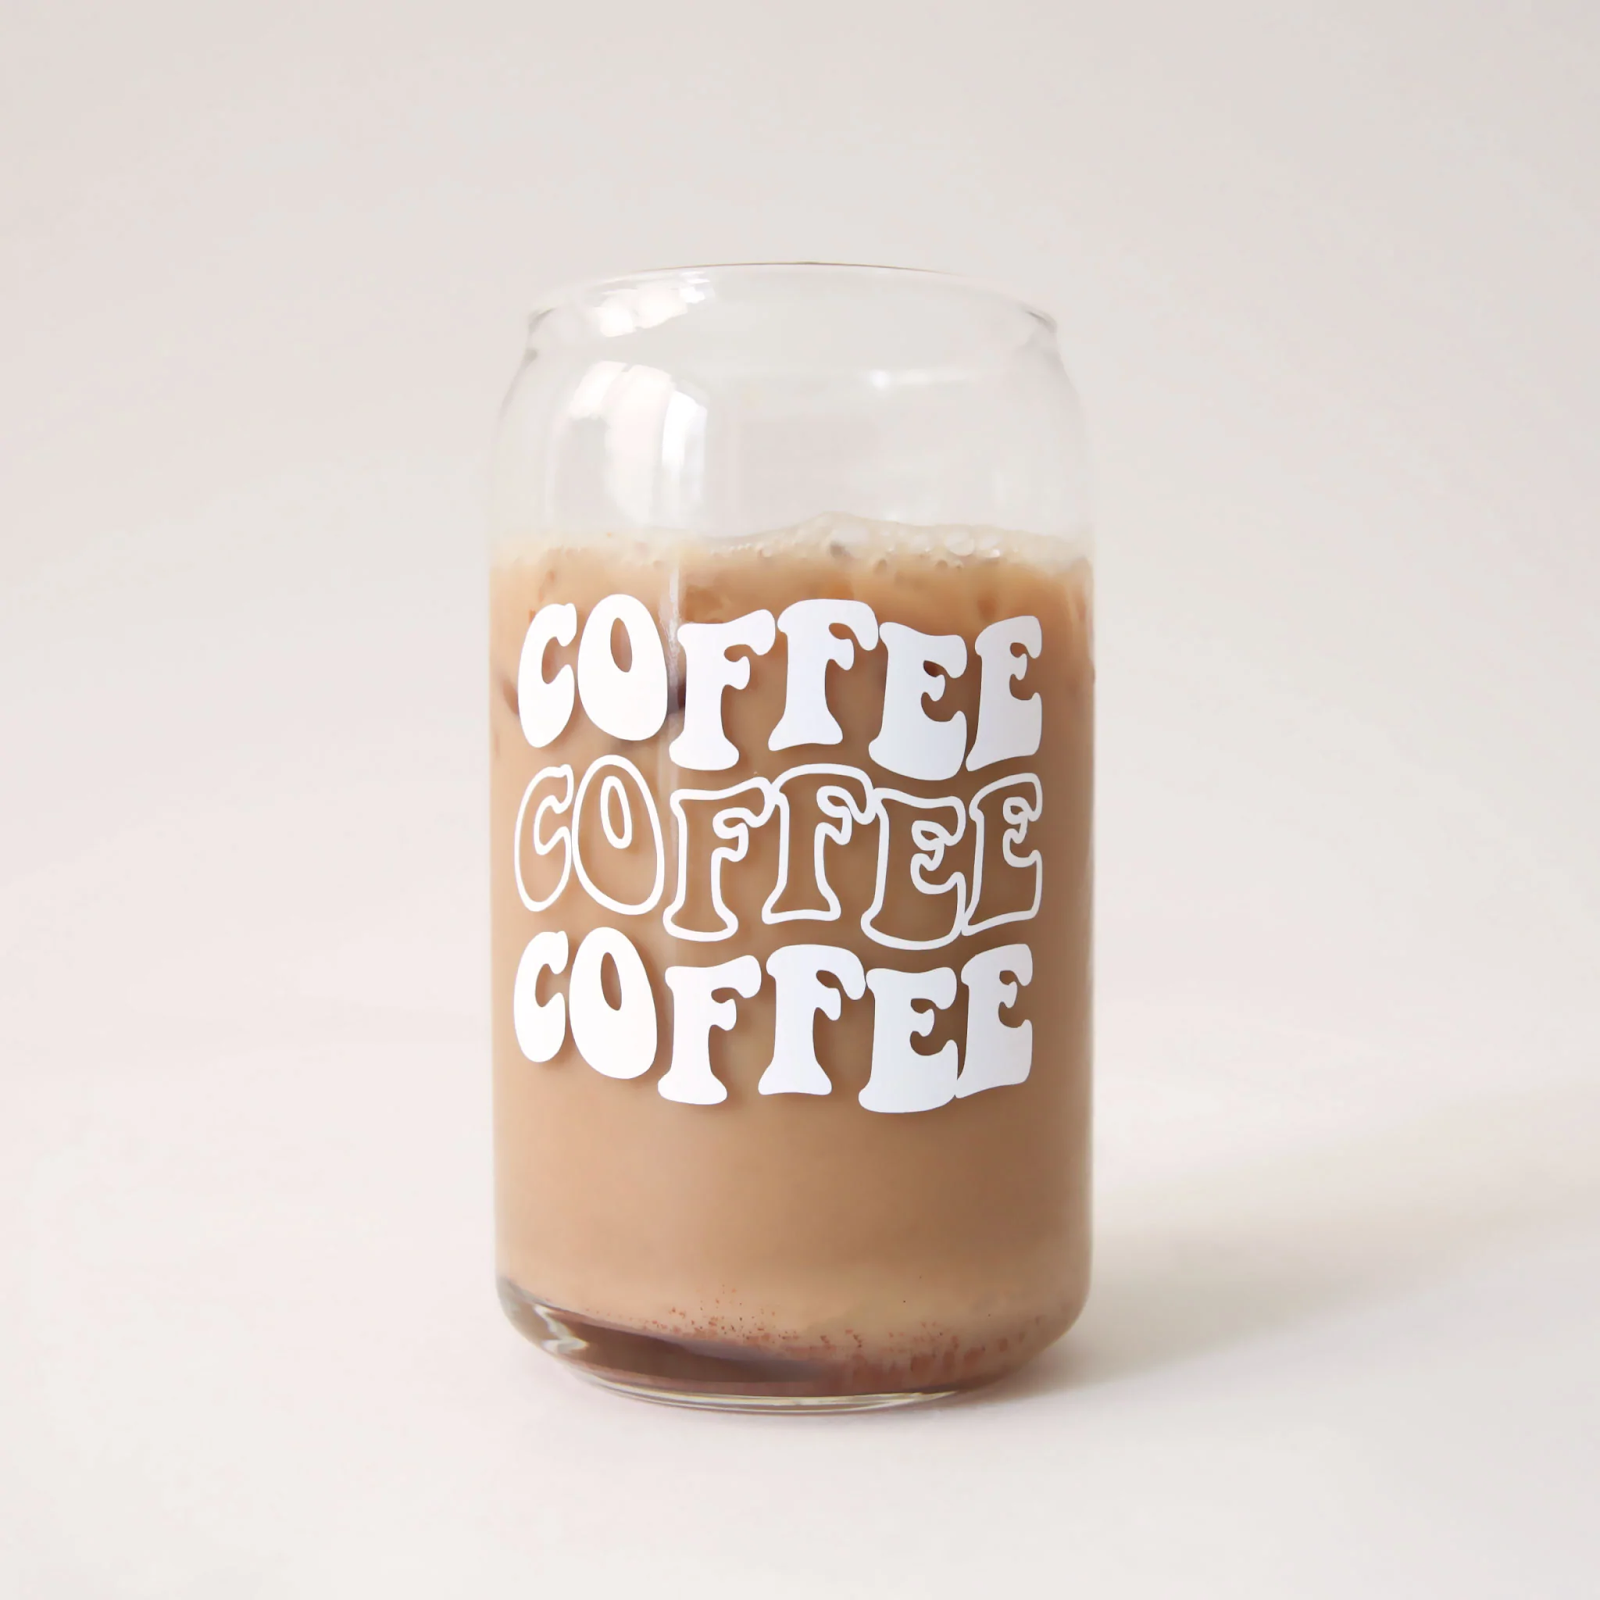 glass cup that says "coffee coffee coffee" in a retro font